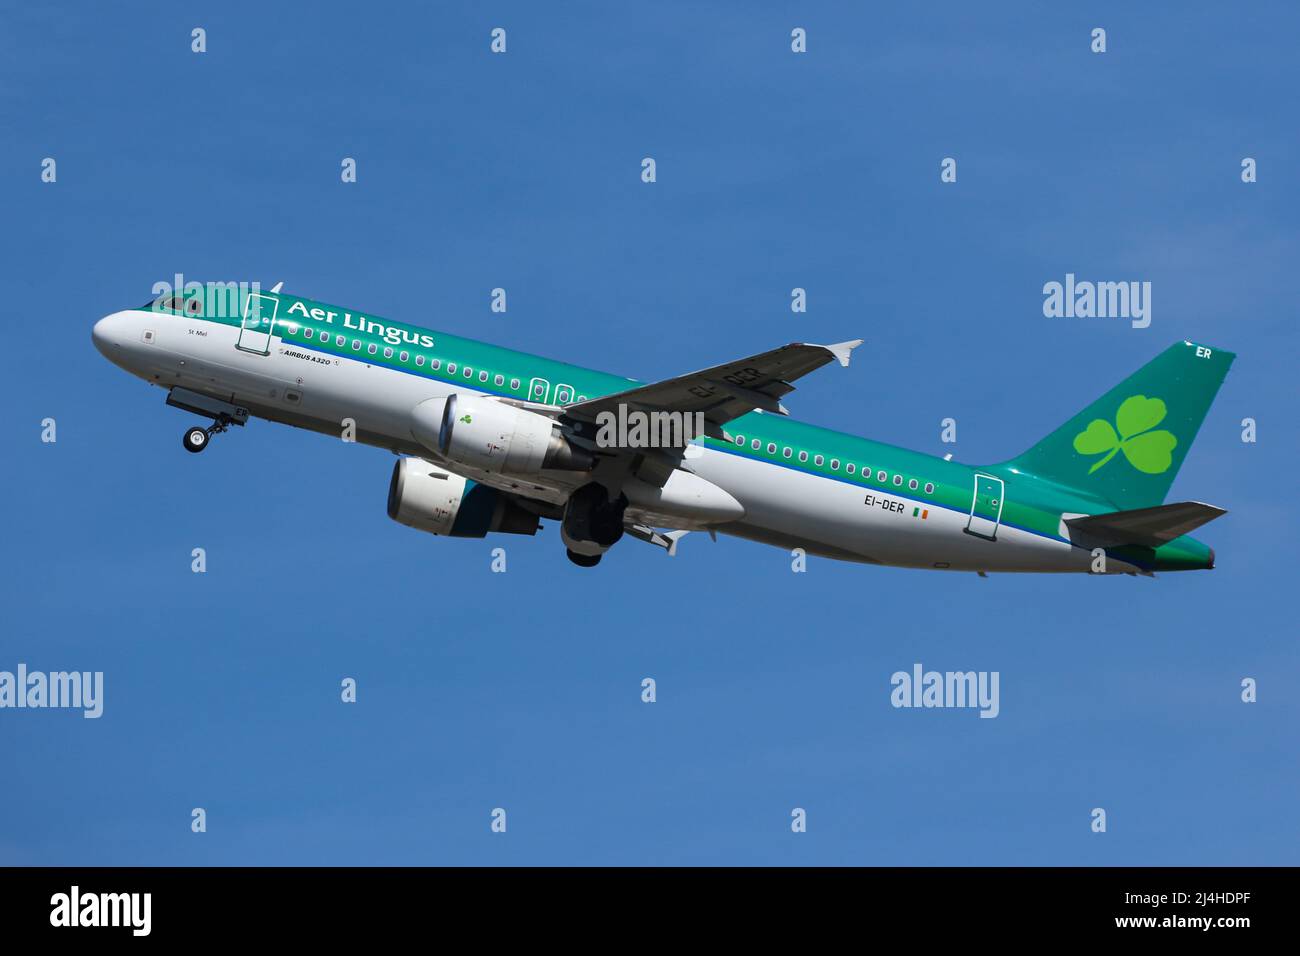 An Airbus A320 operated by Aer Lingus departs from London Heathrow Airport Stock Photo